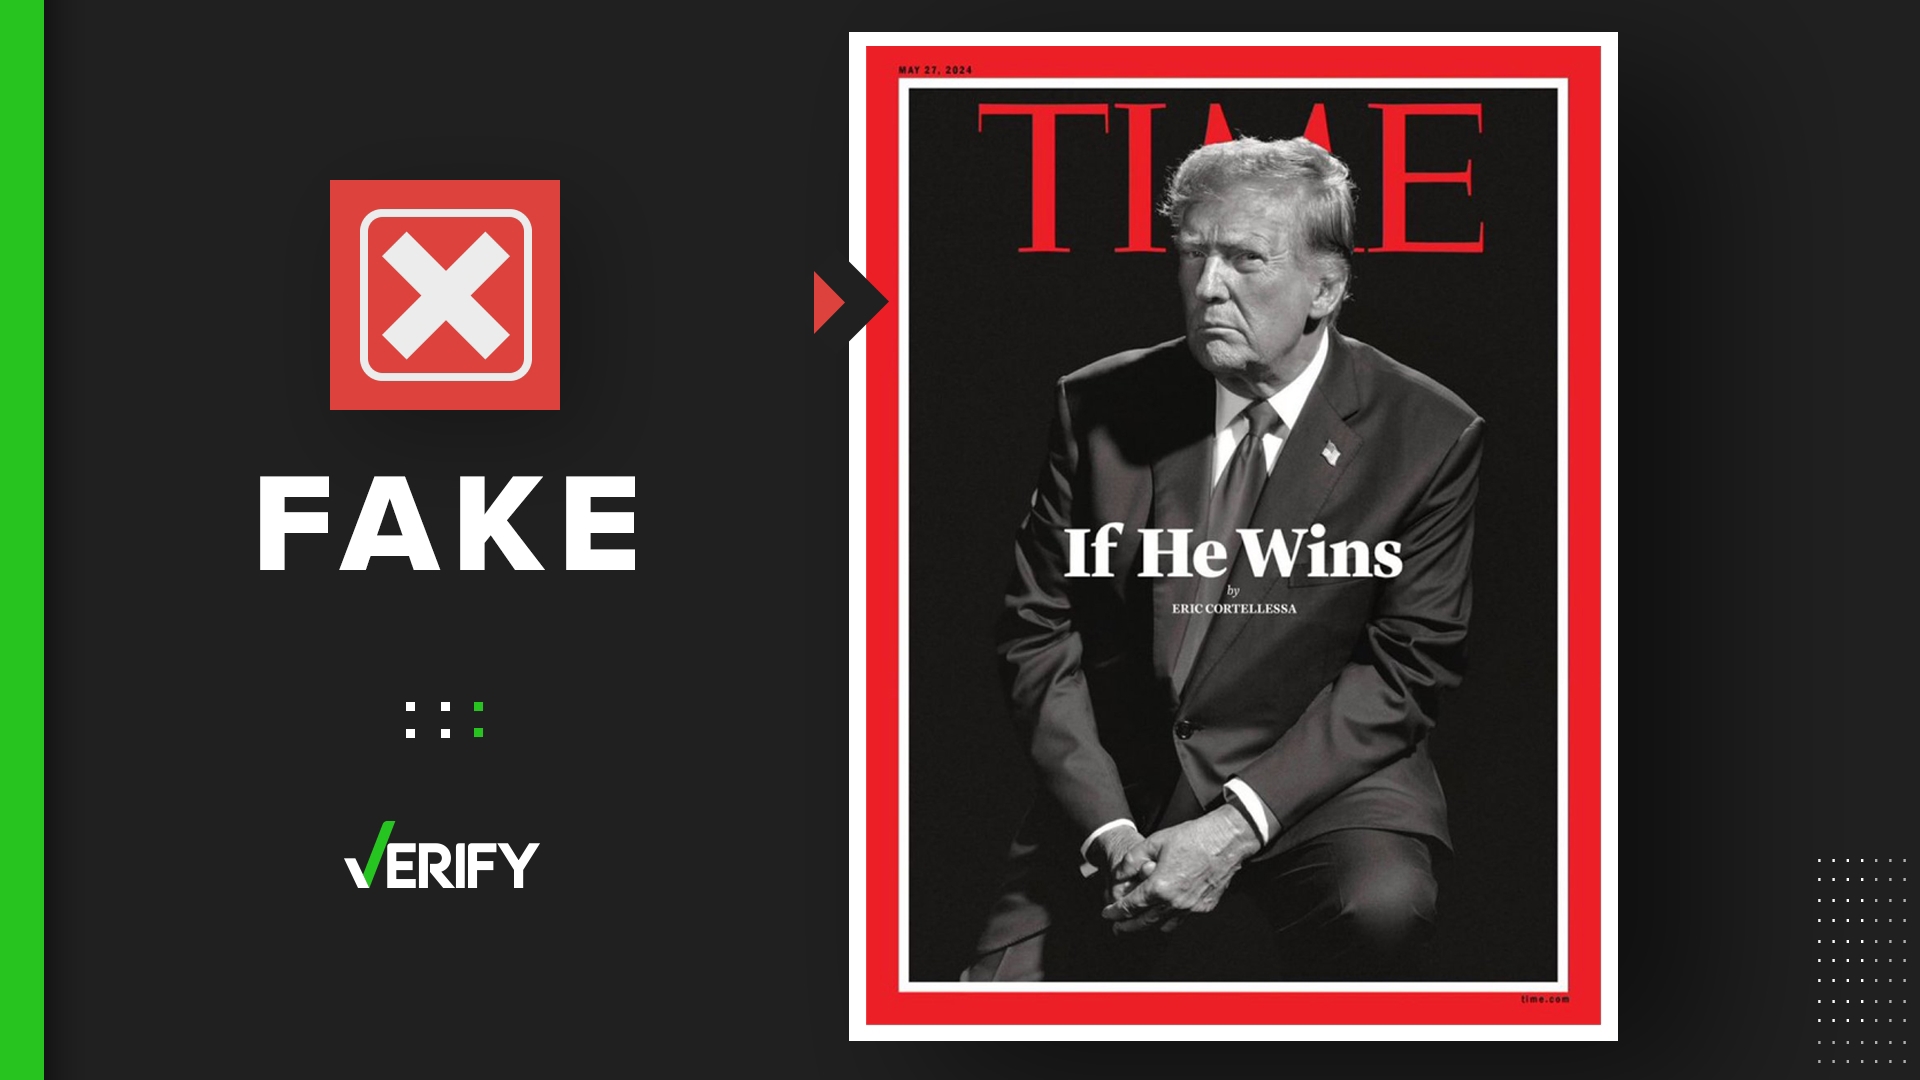 Donald Trump TIME cover was digitally altered to make the TIME lettering look like devil horns. Real published image does not create the appearance of devil horns.